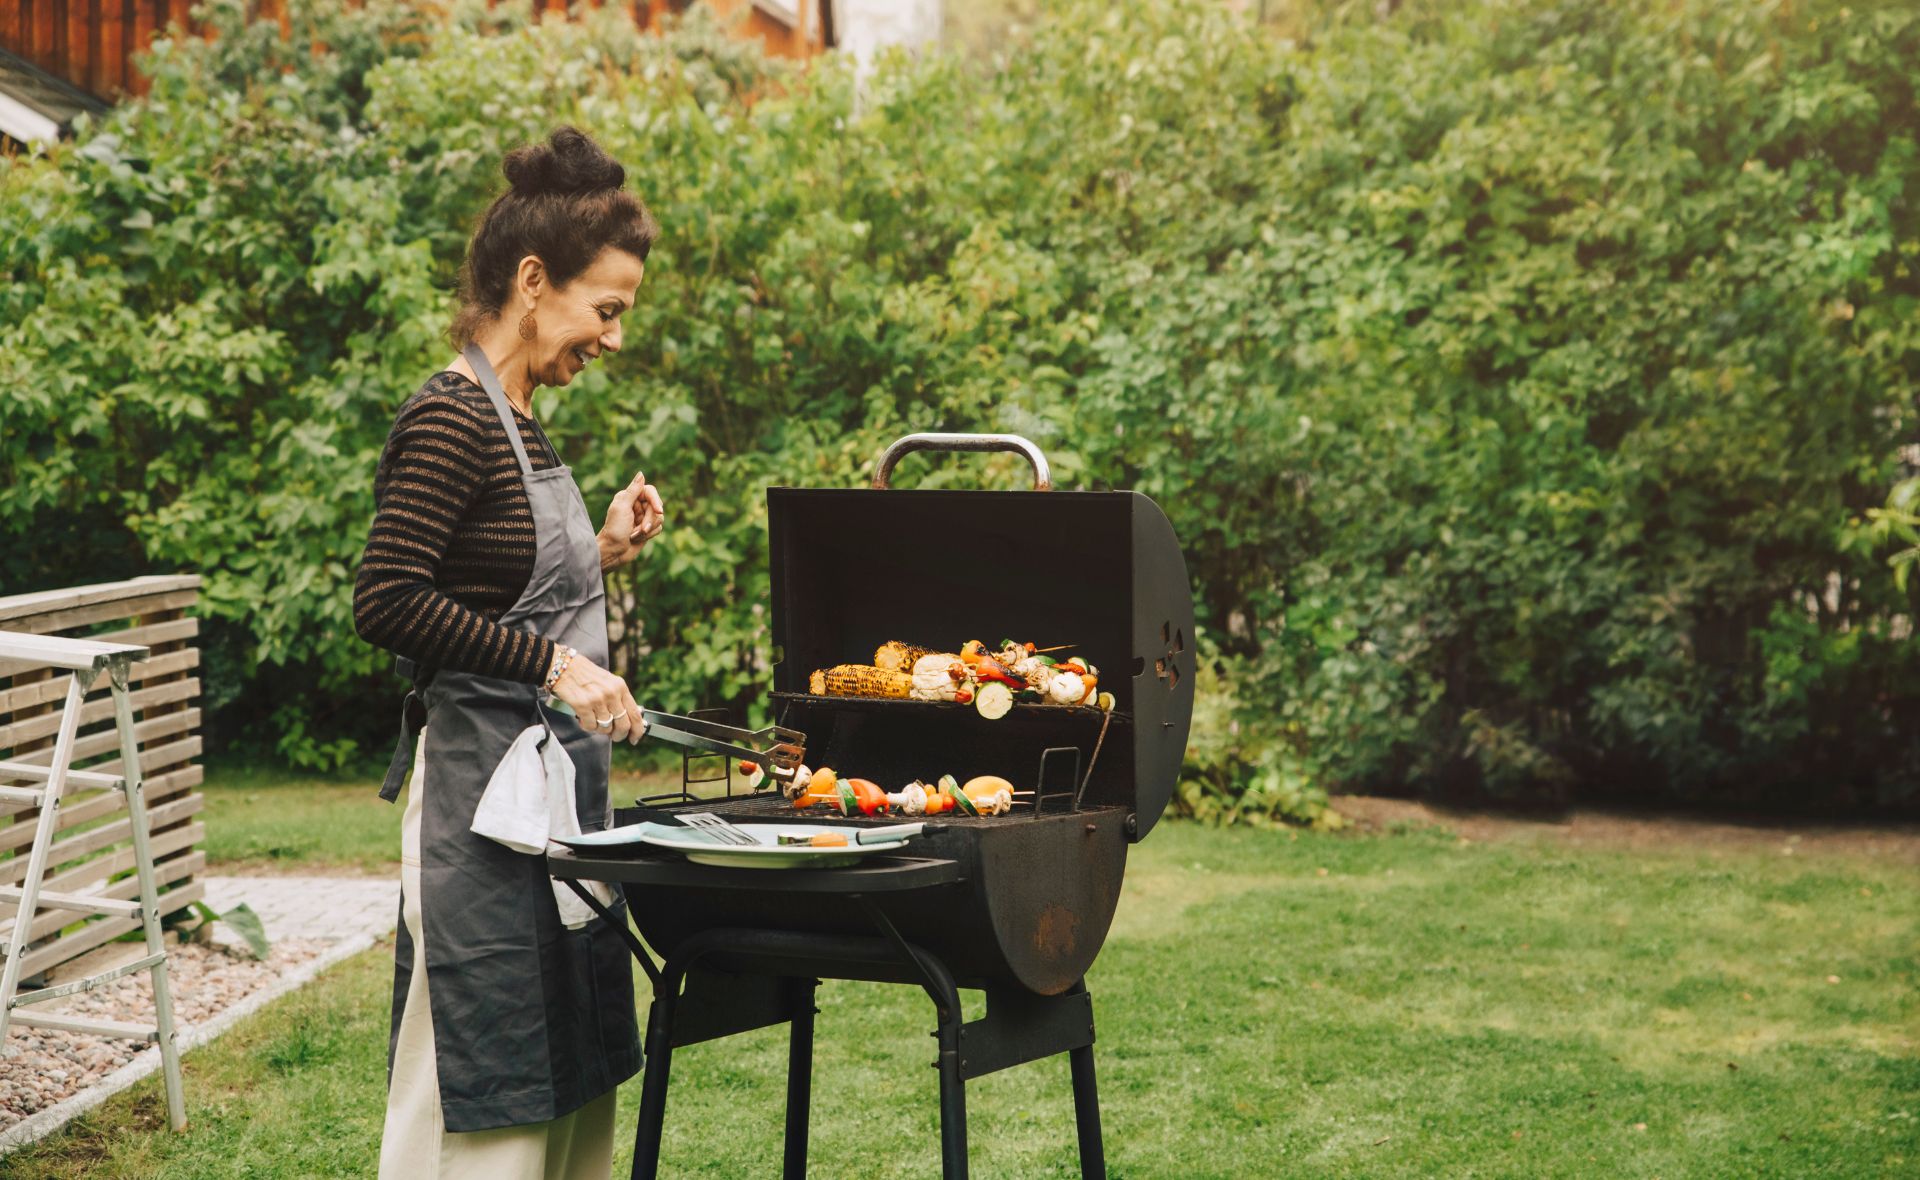 How to clean a barbeque using household items